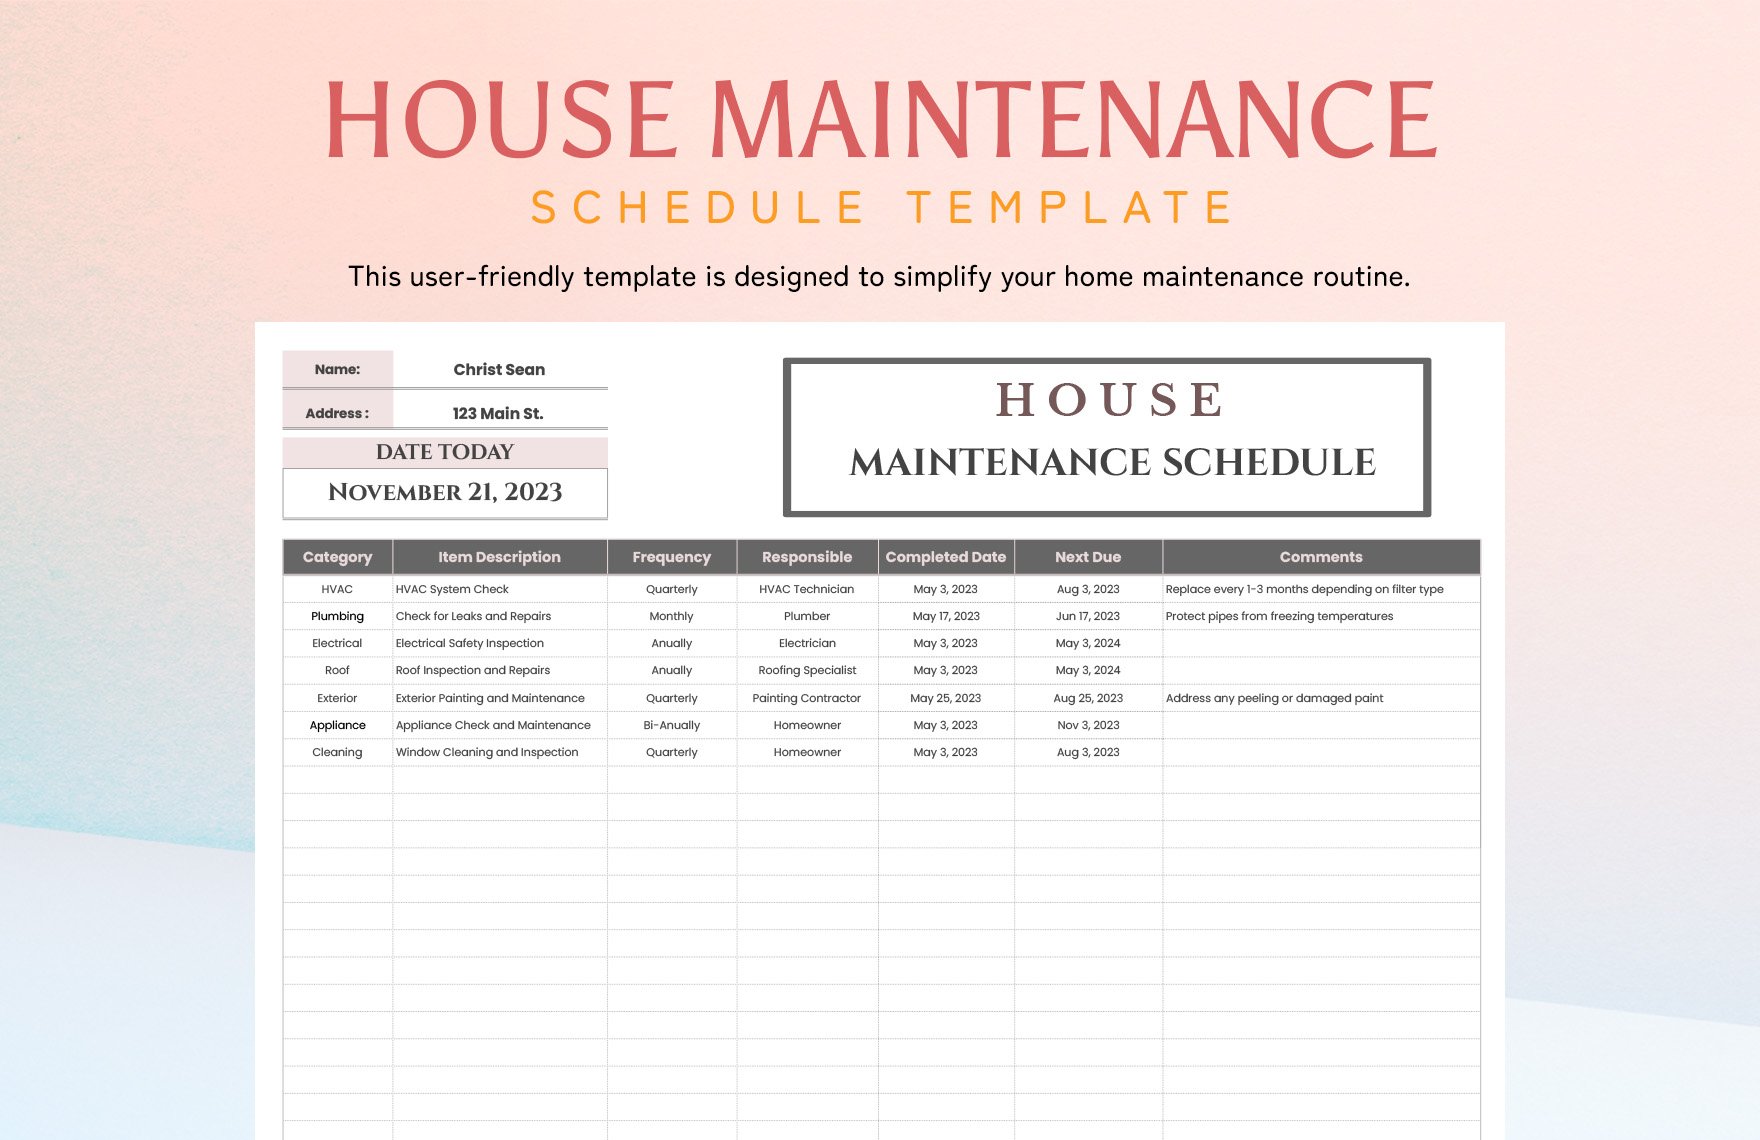 Free House Maintenance Schedule Template in Excel, Google Sheets